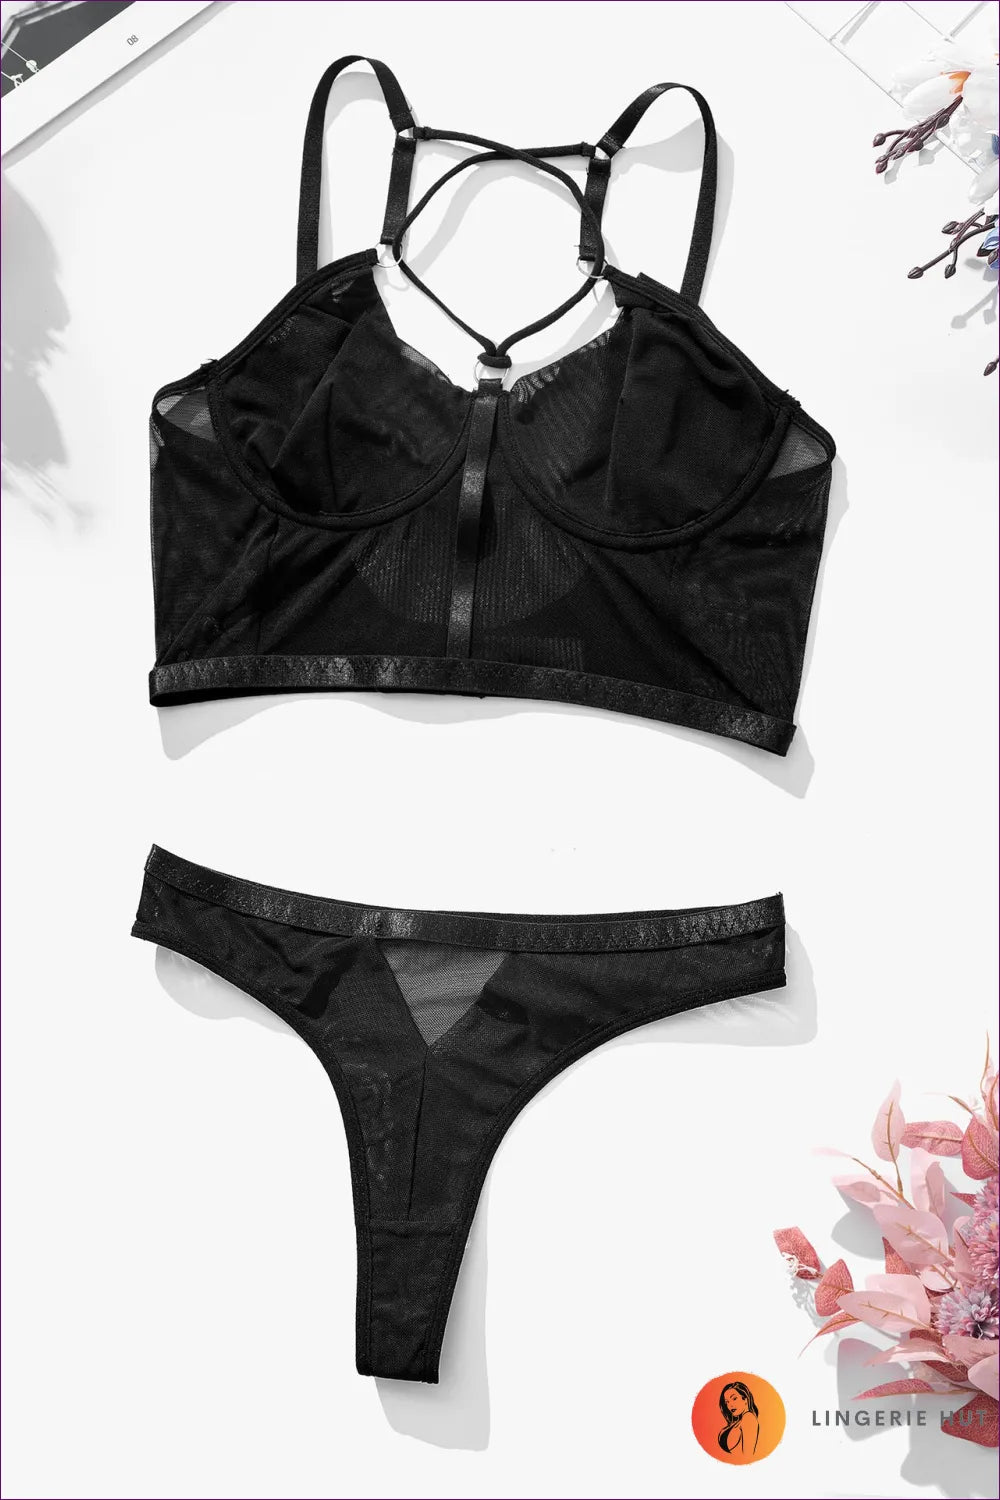 Indulge In Seduction With Our Sultry Black Lace Mesh Lingerie Set. Designed For Unforgettable Nights, This